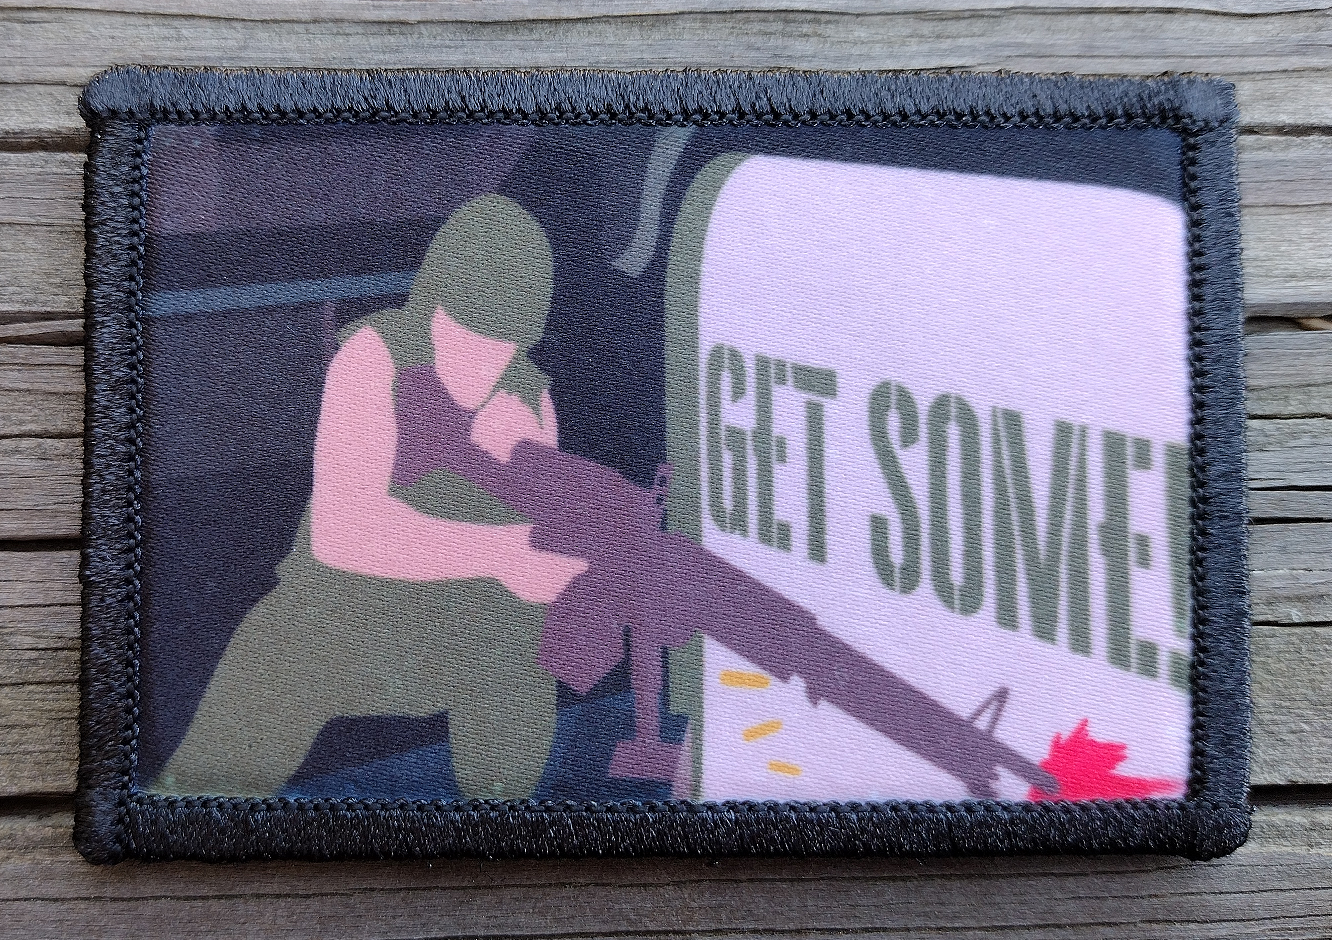 Full Metal Jacket Get Some Morale Patch